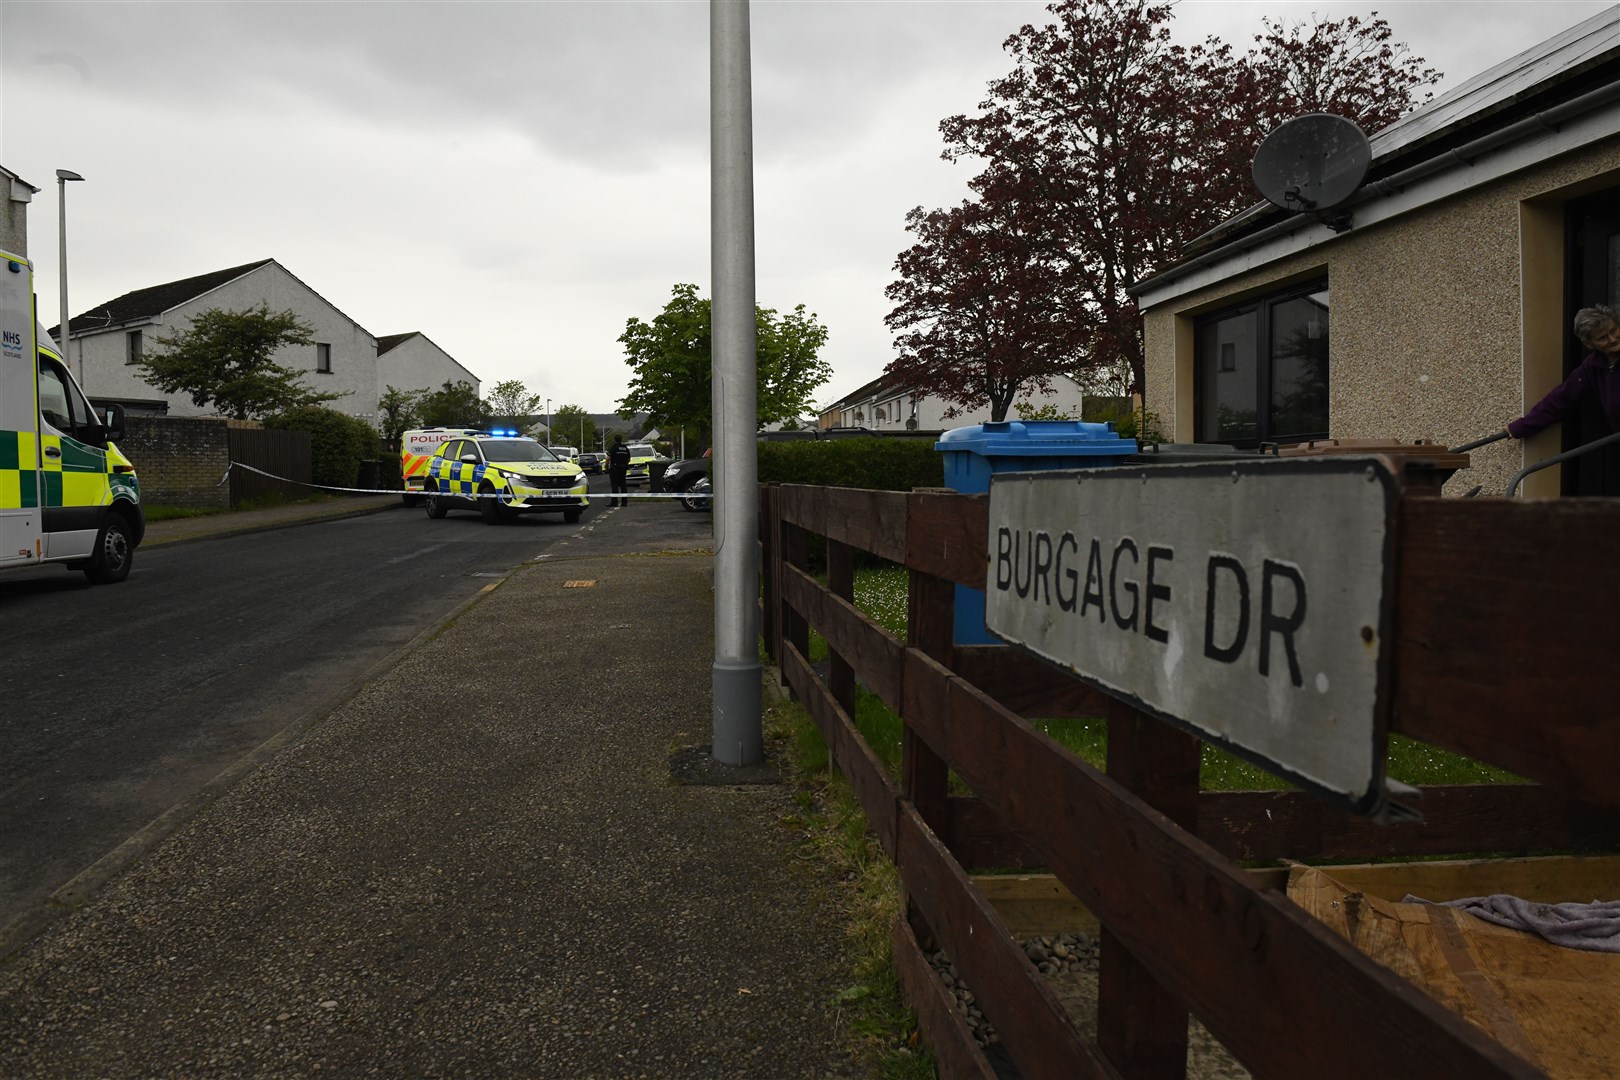 Police are on the scene of the incident at Burgage Drive.